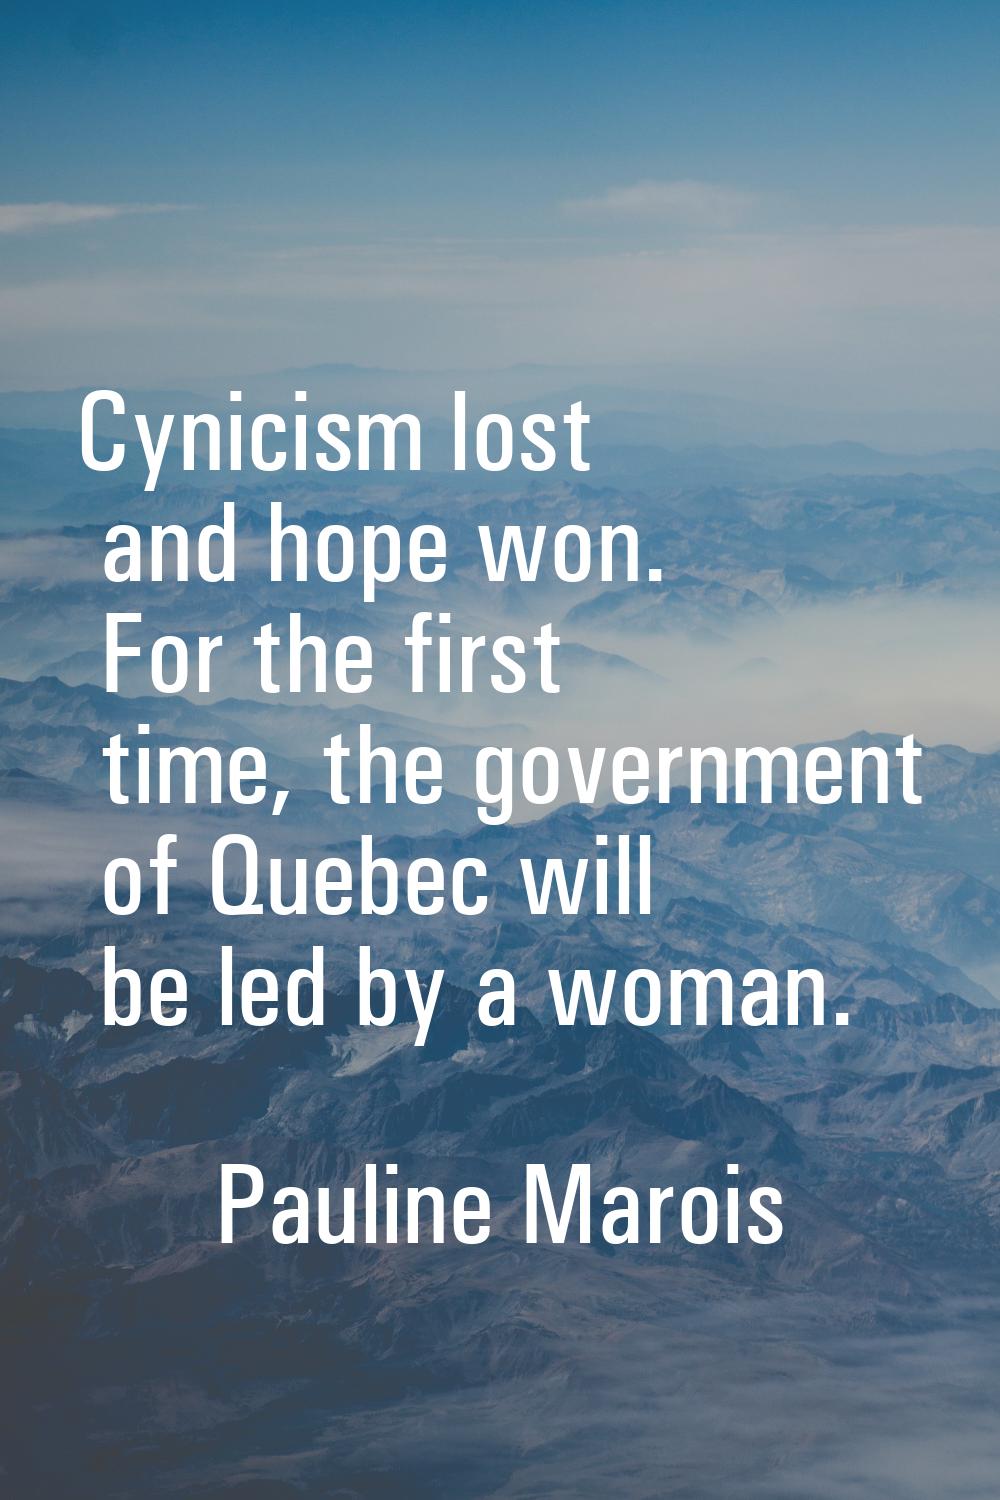 Cynicism lost and hope won. For the first time, the government of Quebec will be led by a woman.